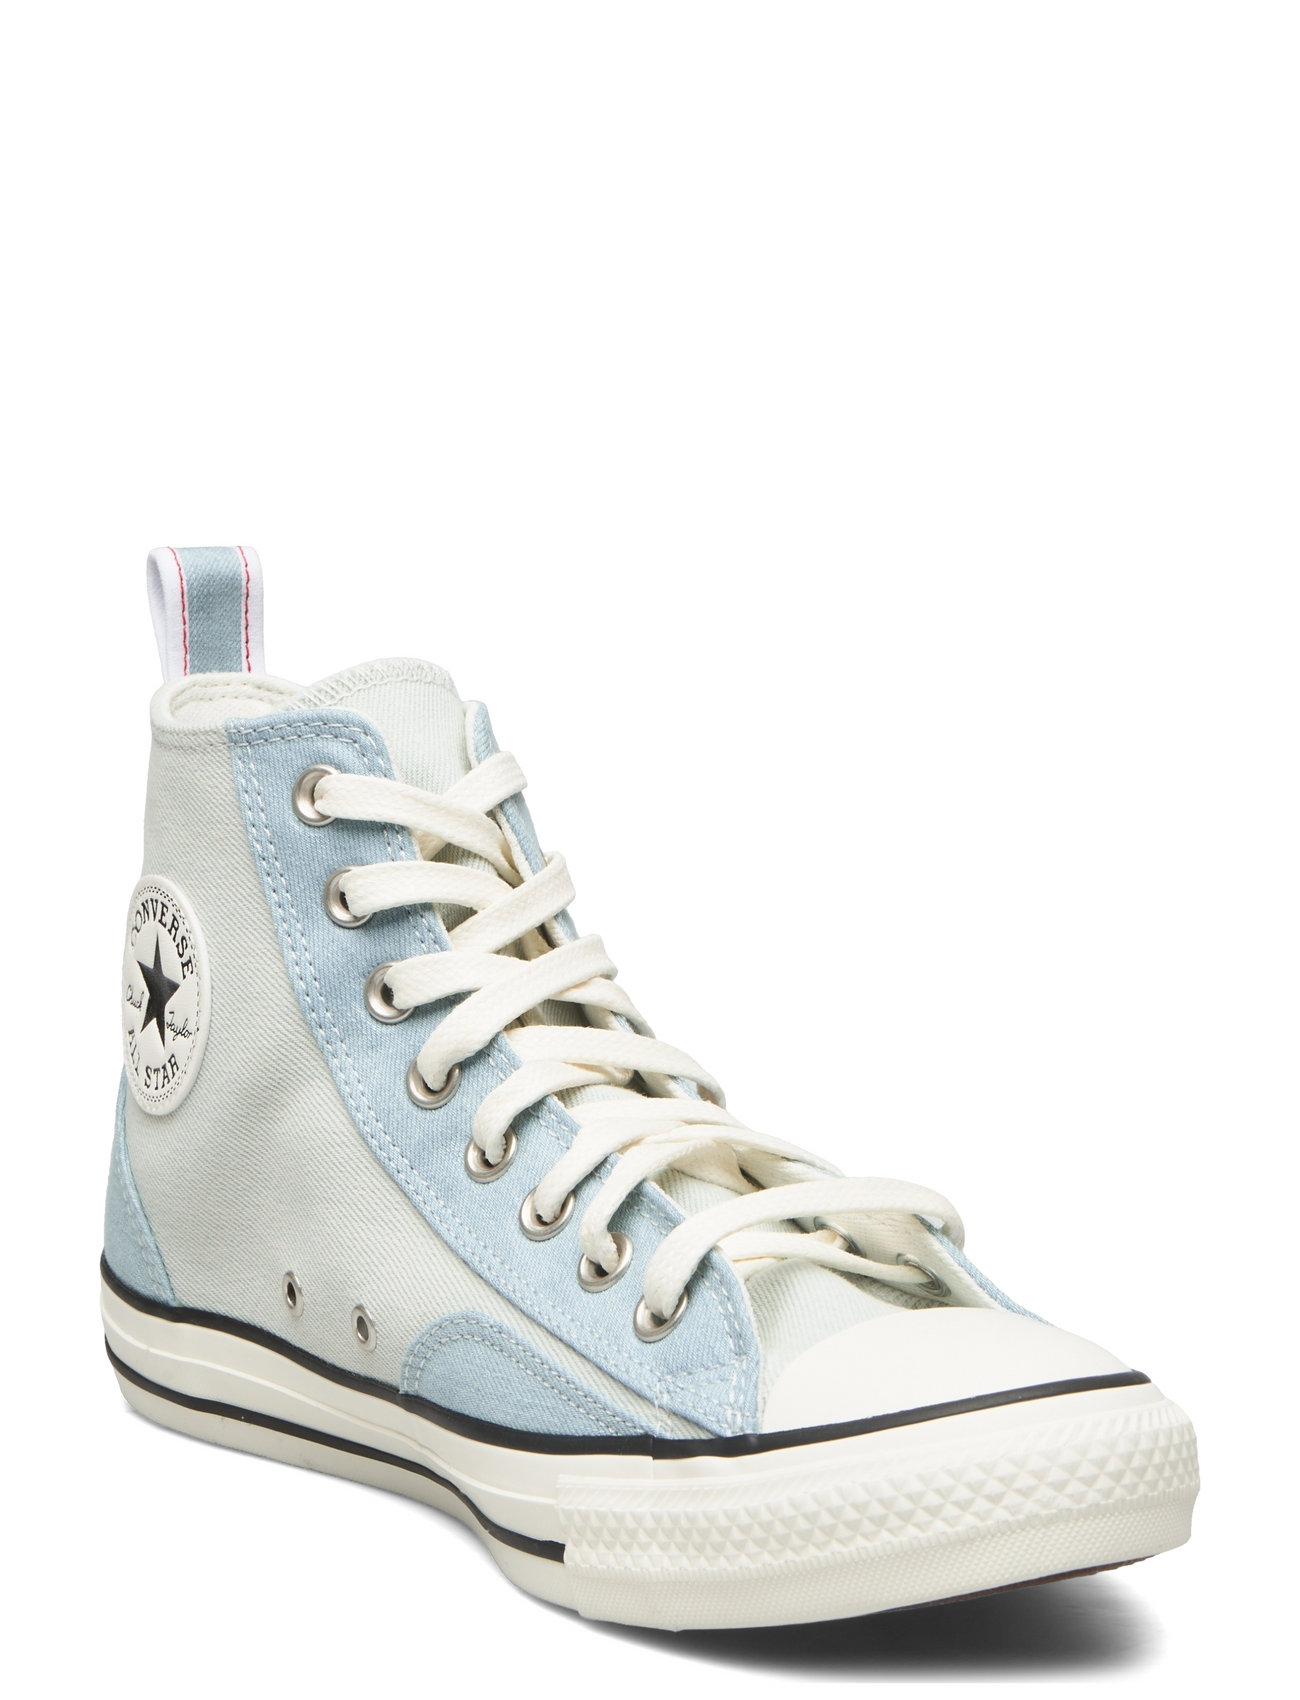 Converse Chuck Taylor All Star - sneakers